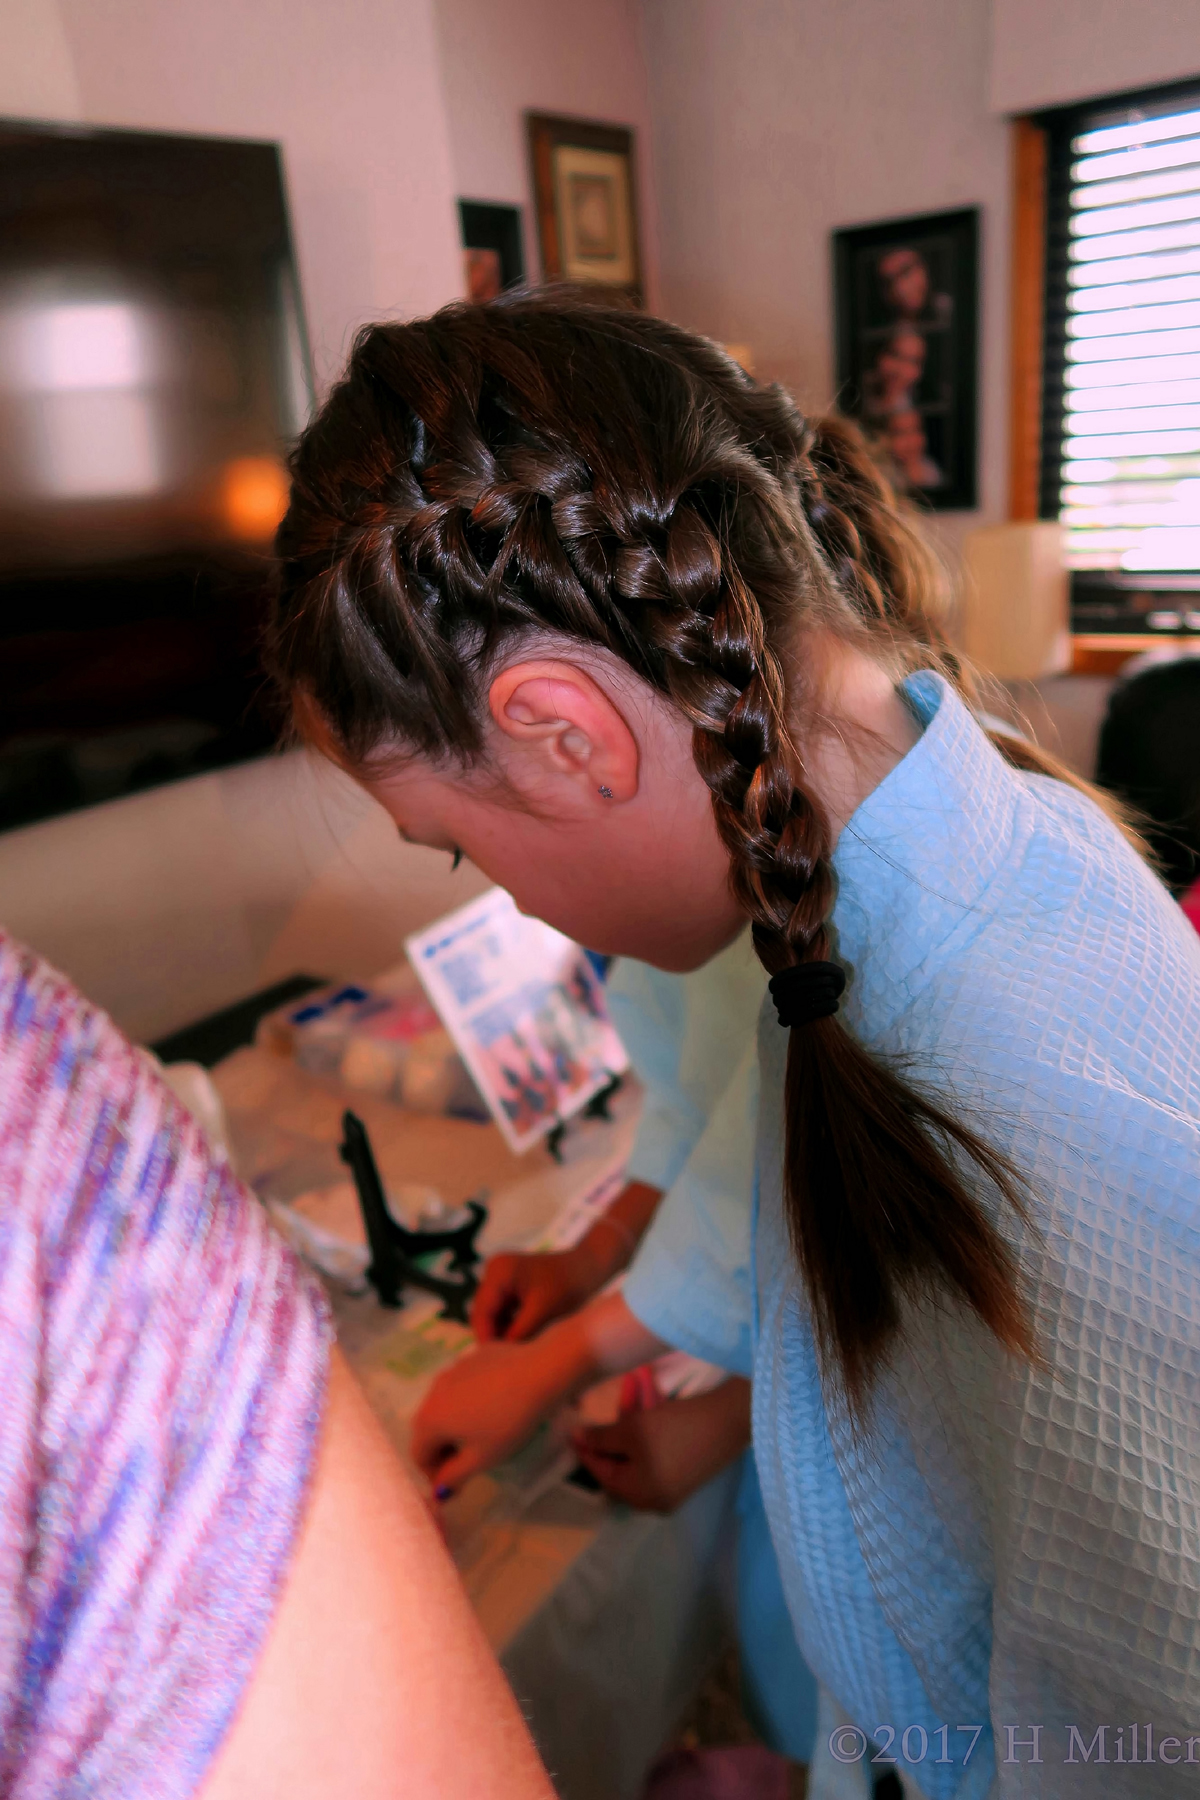 Dutch French Braid Girls Hairstyle Looks Cool On this Spa Party Guest. 